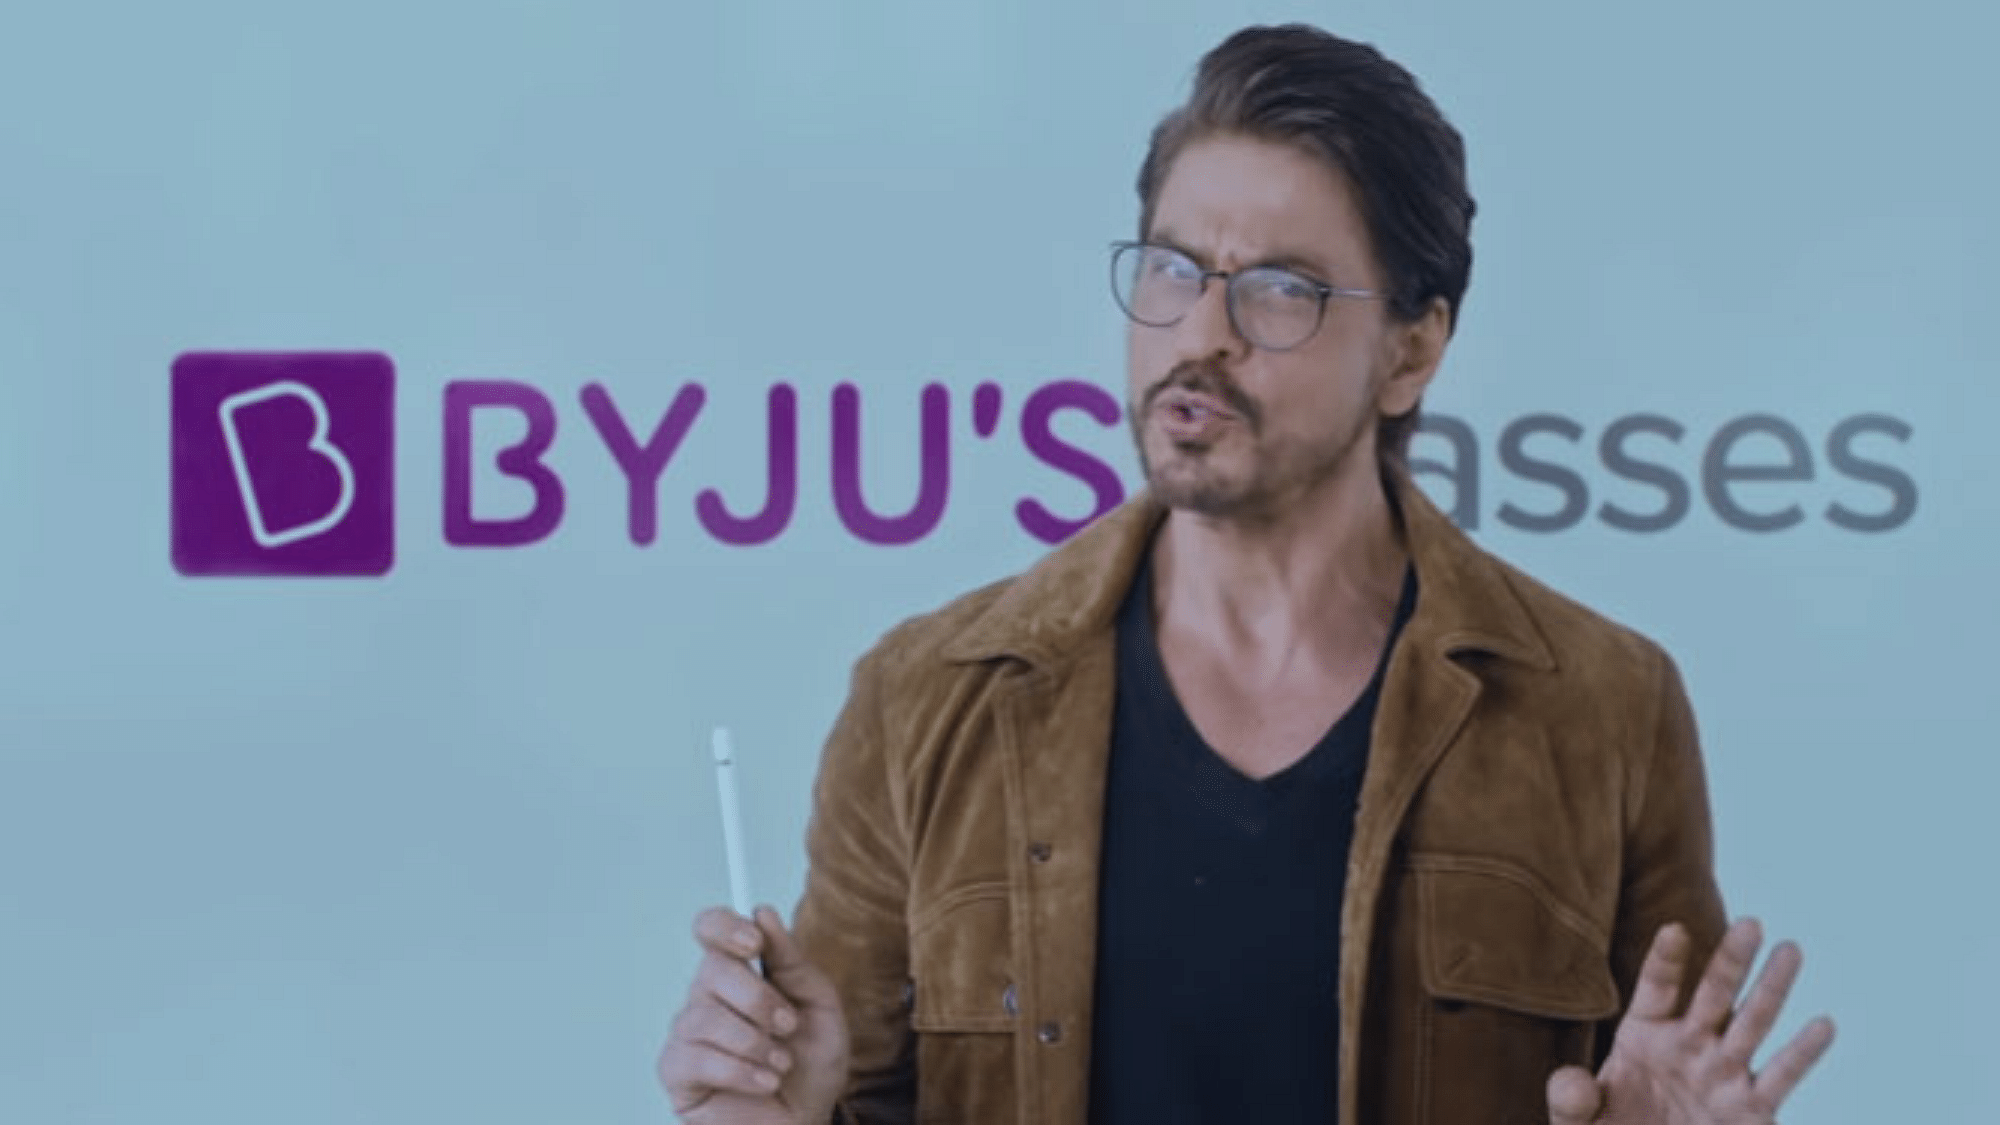 BYJU’s Shah Rukh Khan Advertisement controversy